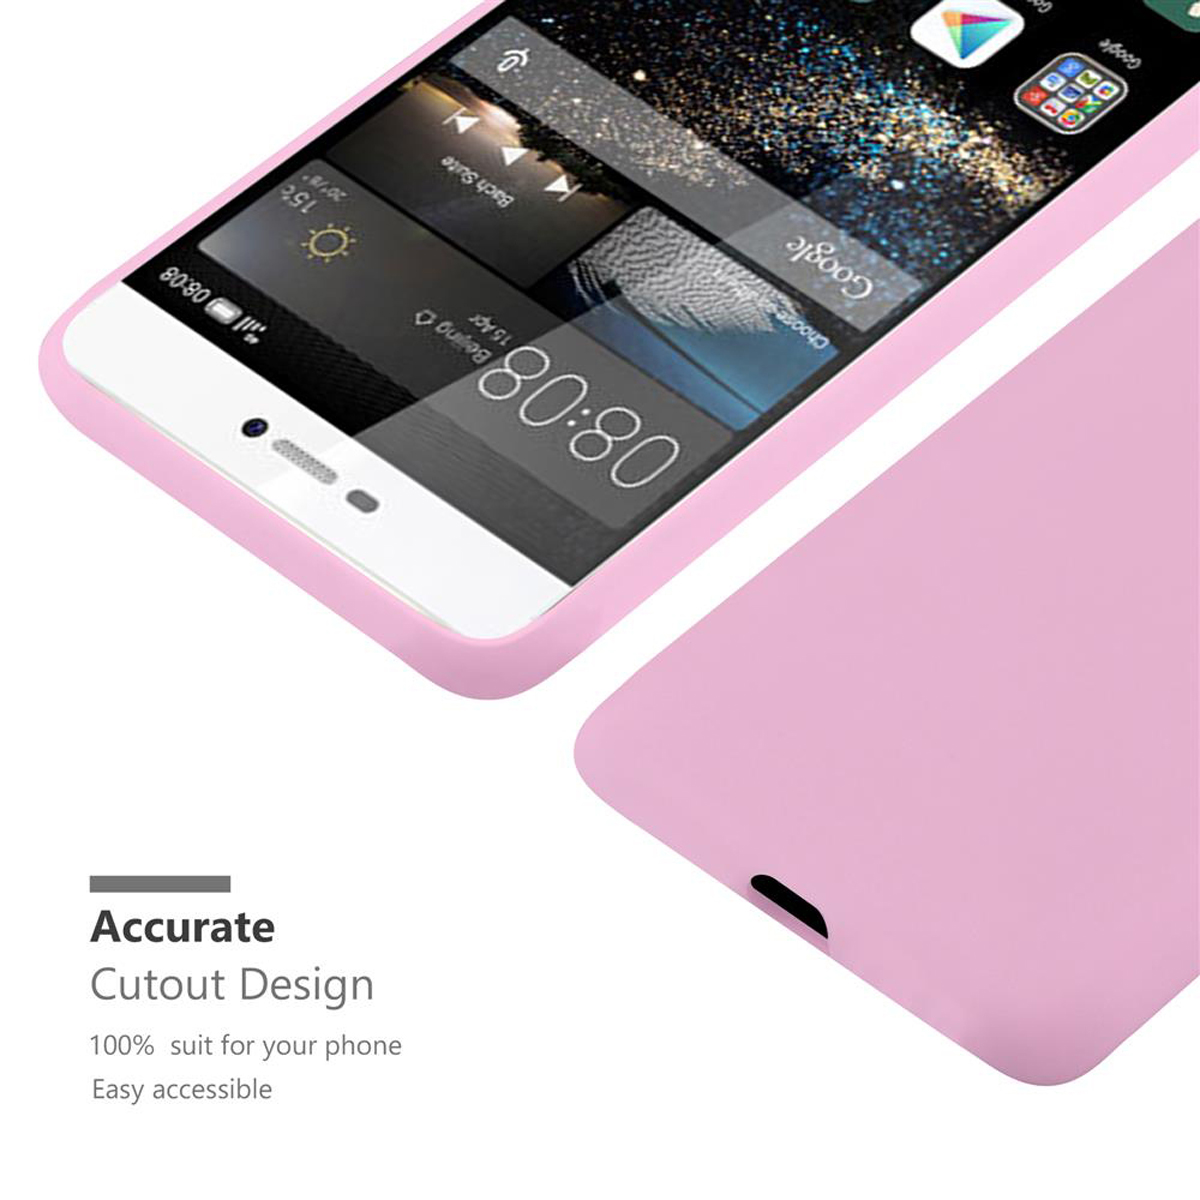 Candy ROSA Huawei, TPU im Backcover, CADORABO P8, Style, Hülle CANDY